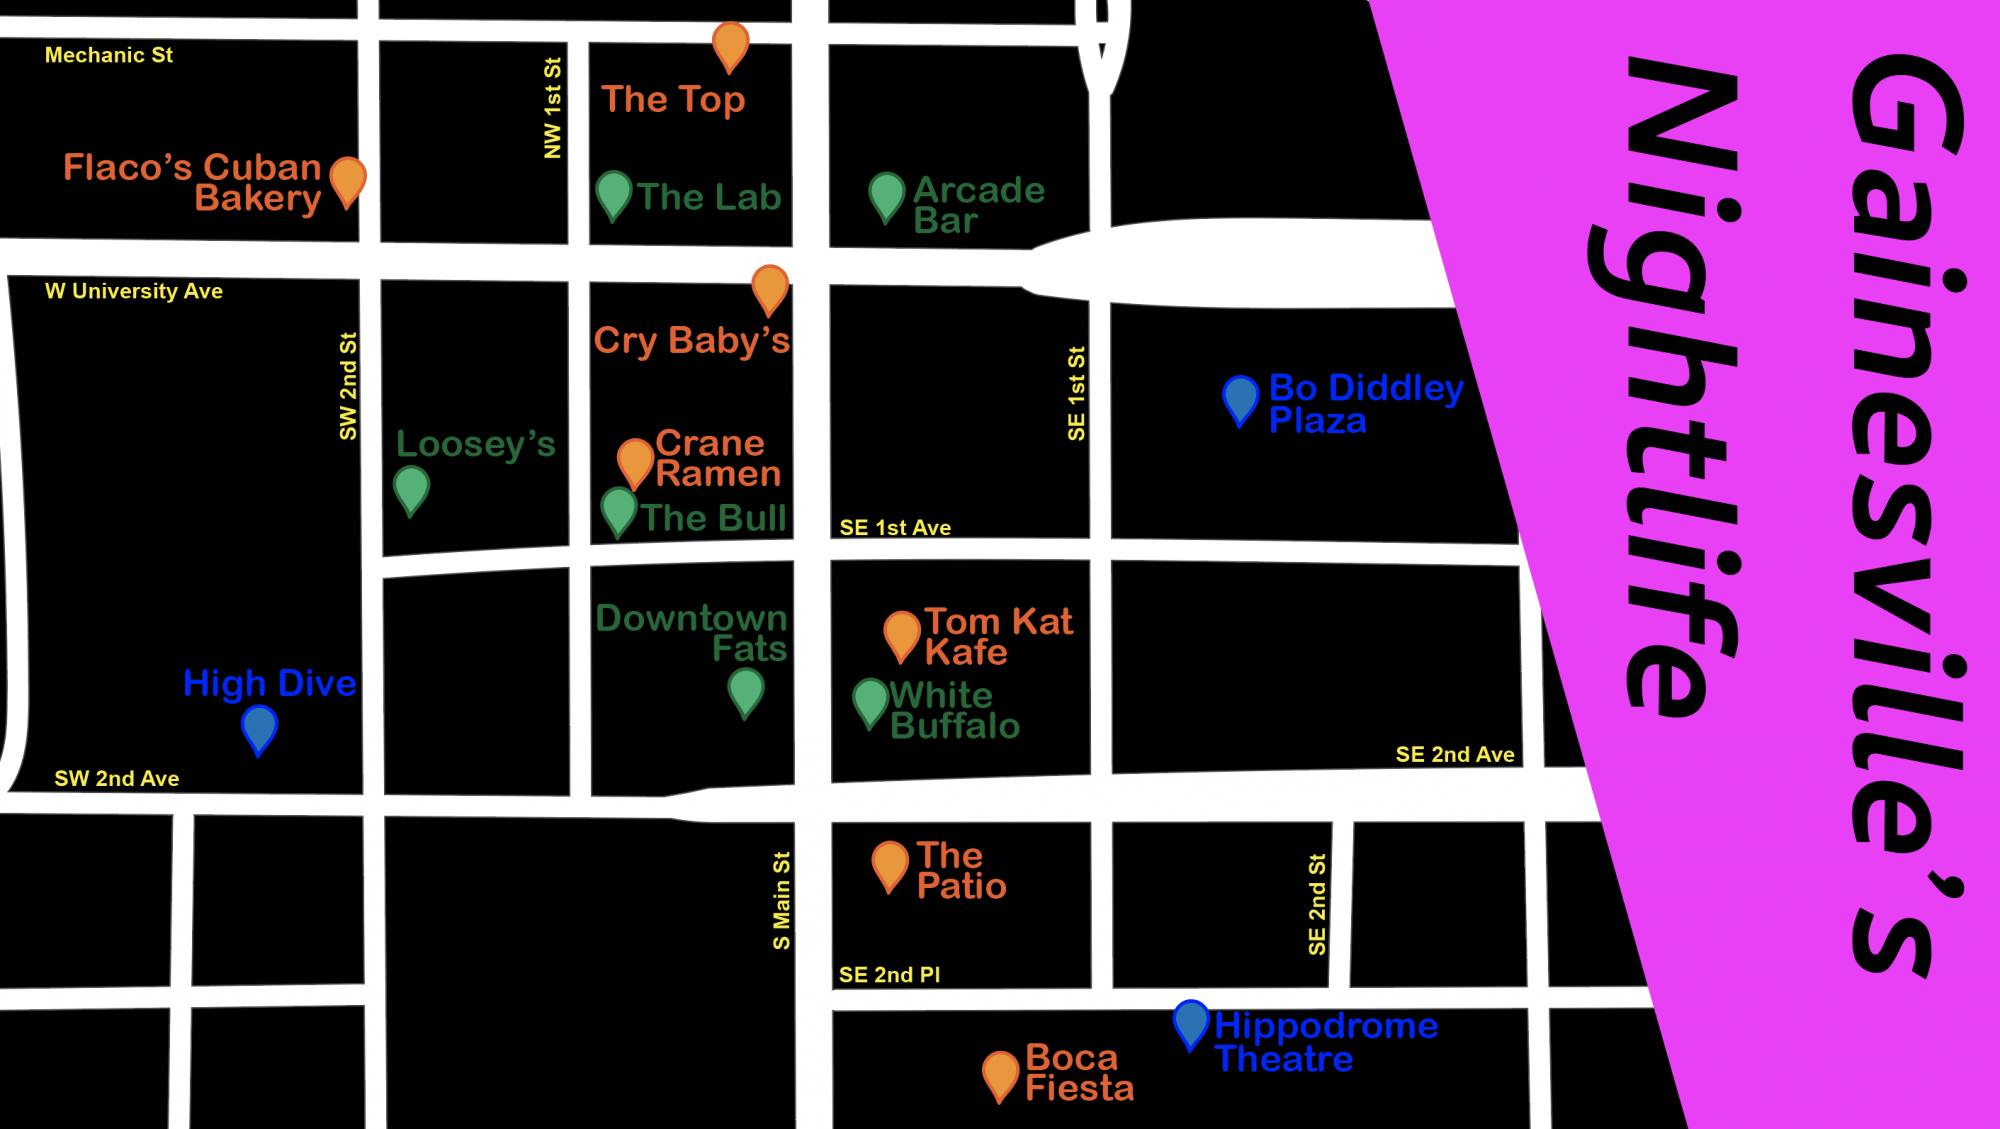 Gainesville nightlife guide image